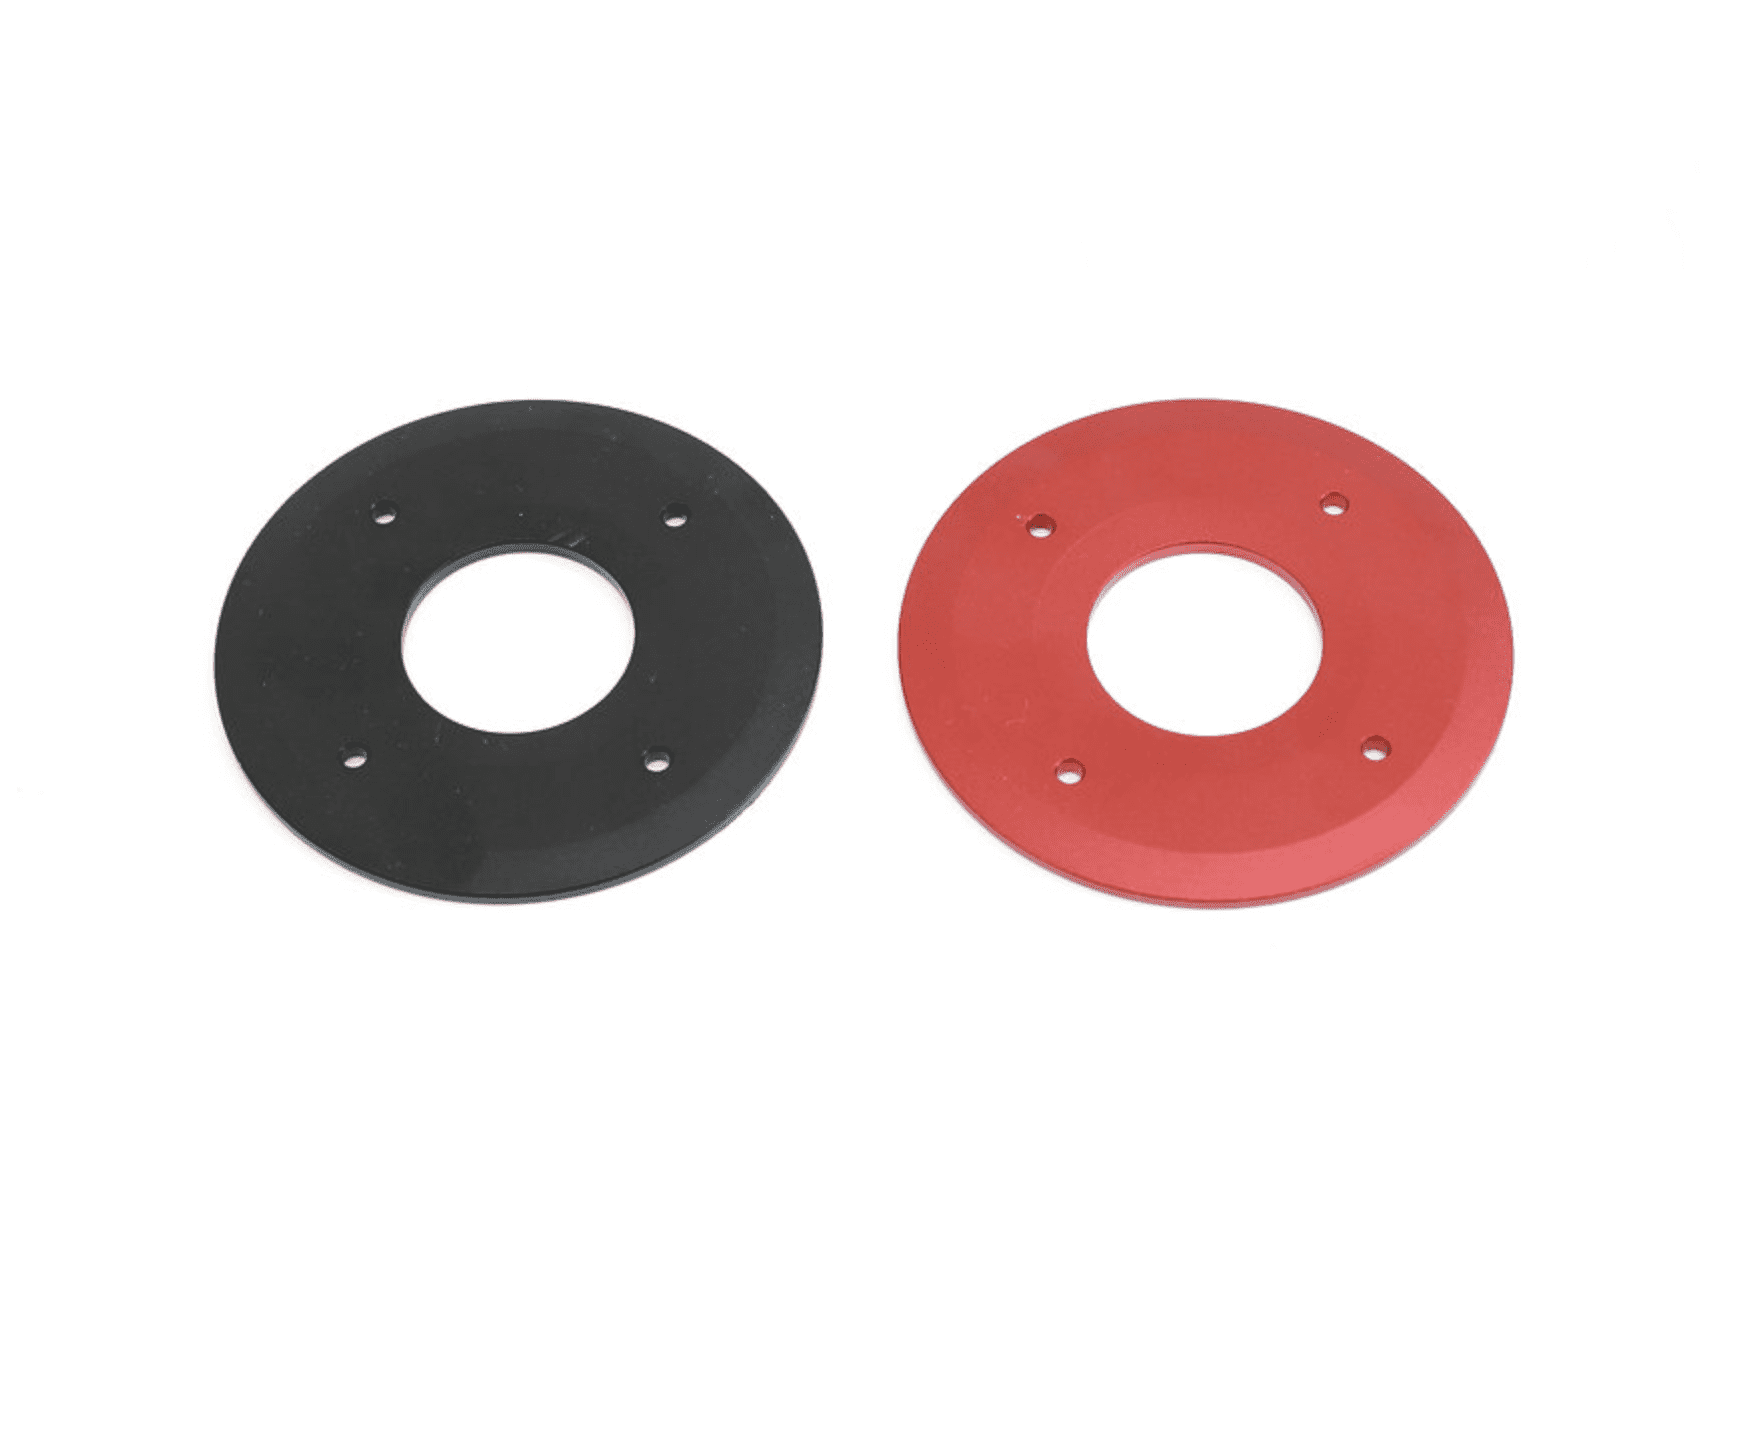 A pair of black and red rubber washers.